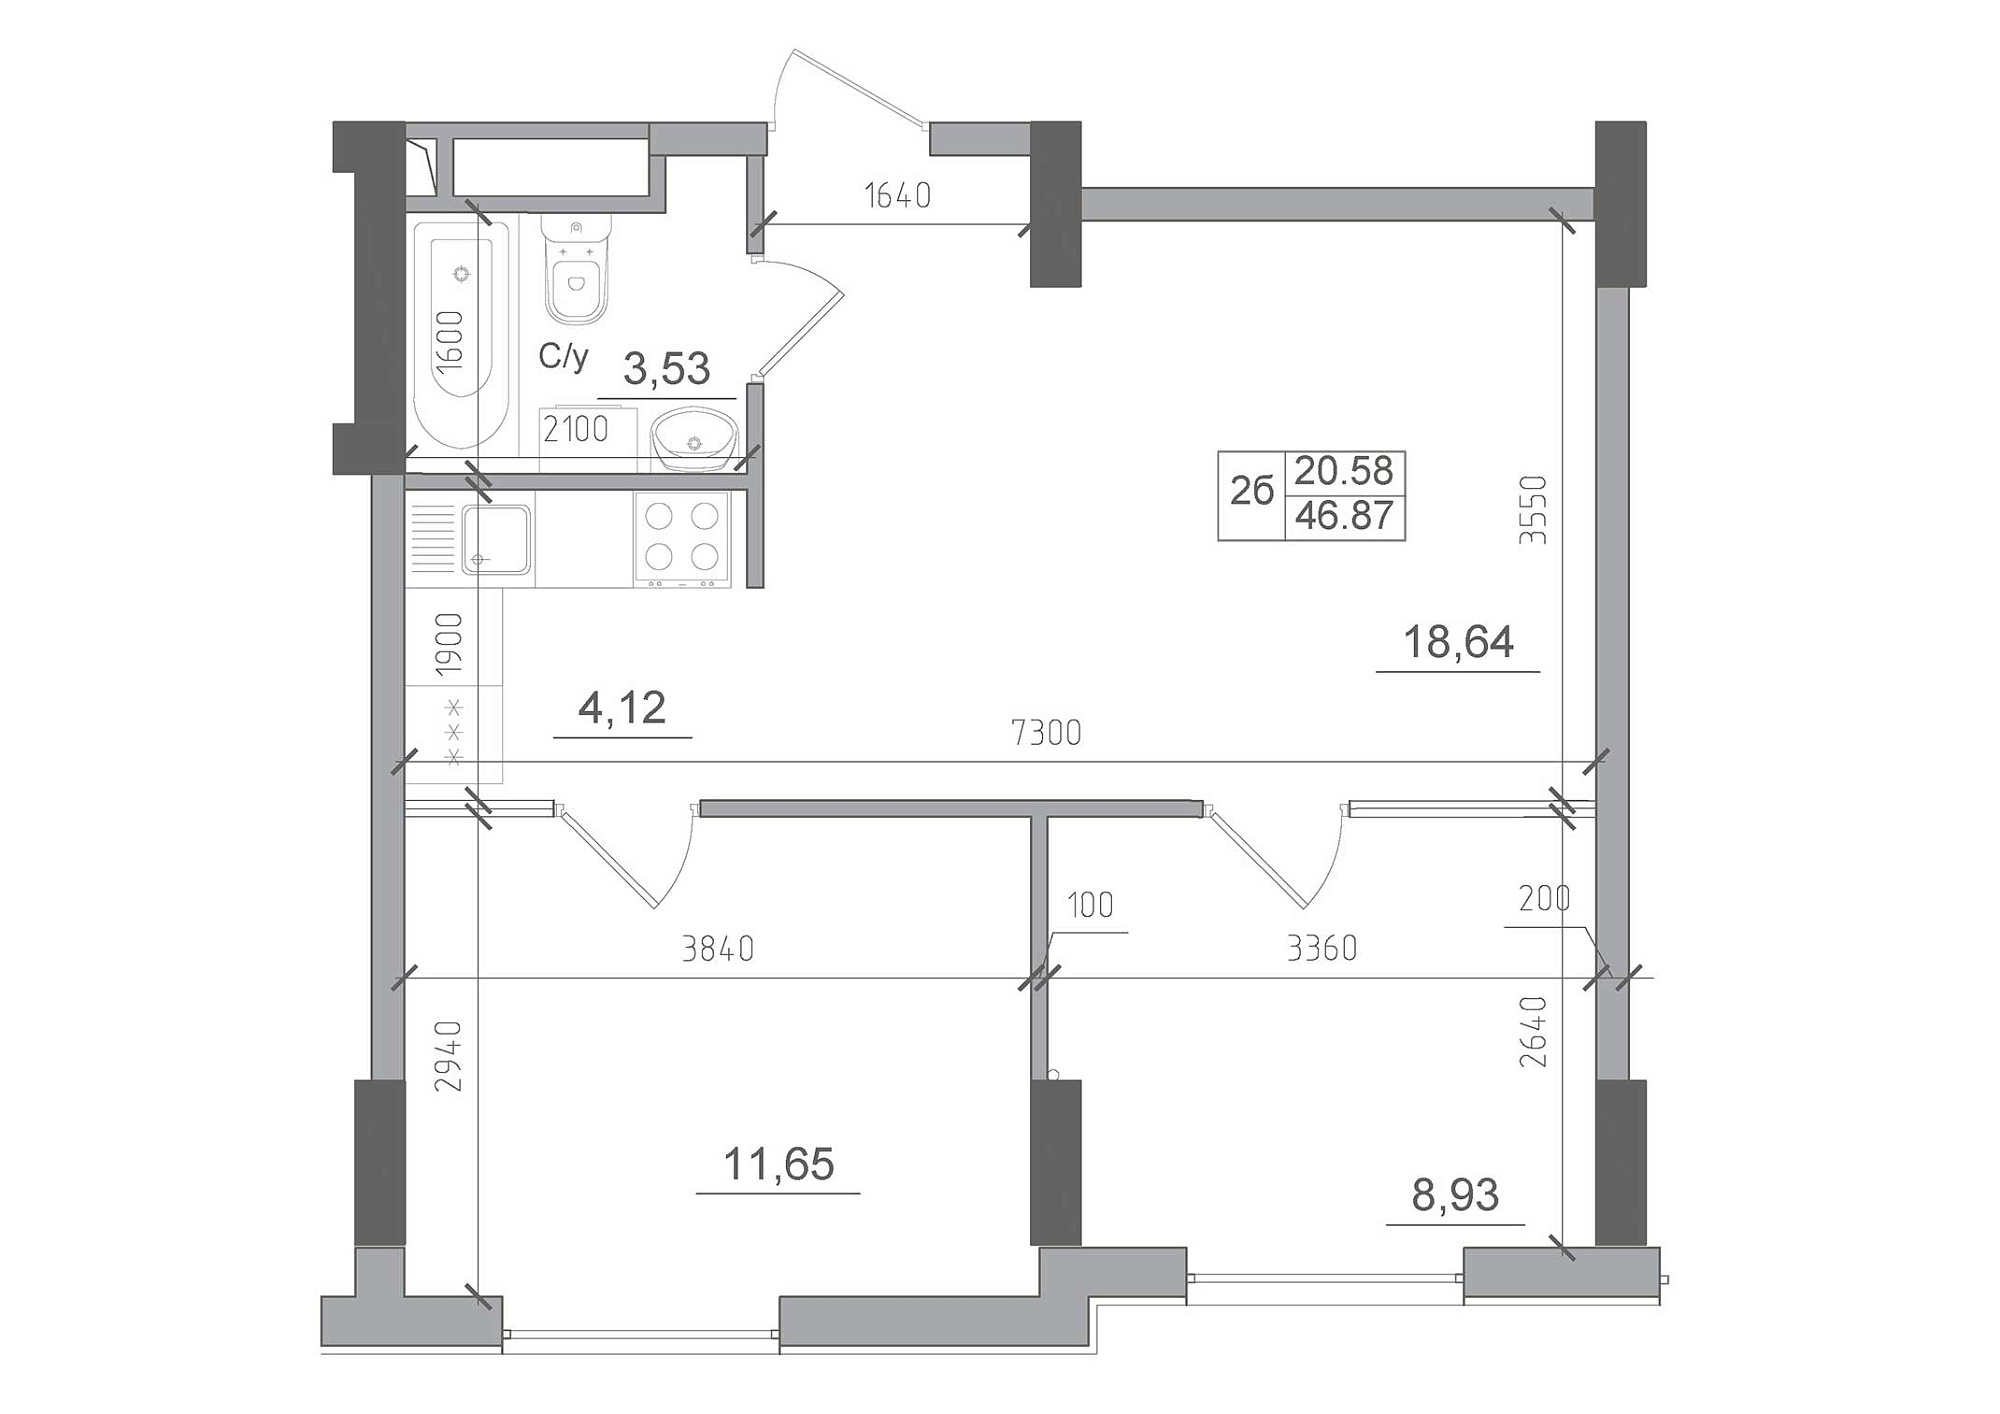 Planning 2-rm flats area 46.87m2, AB-22-12/00008.